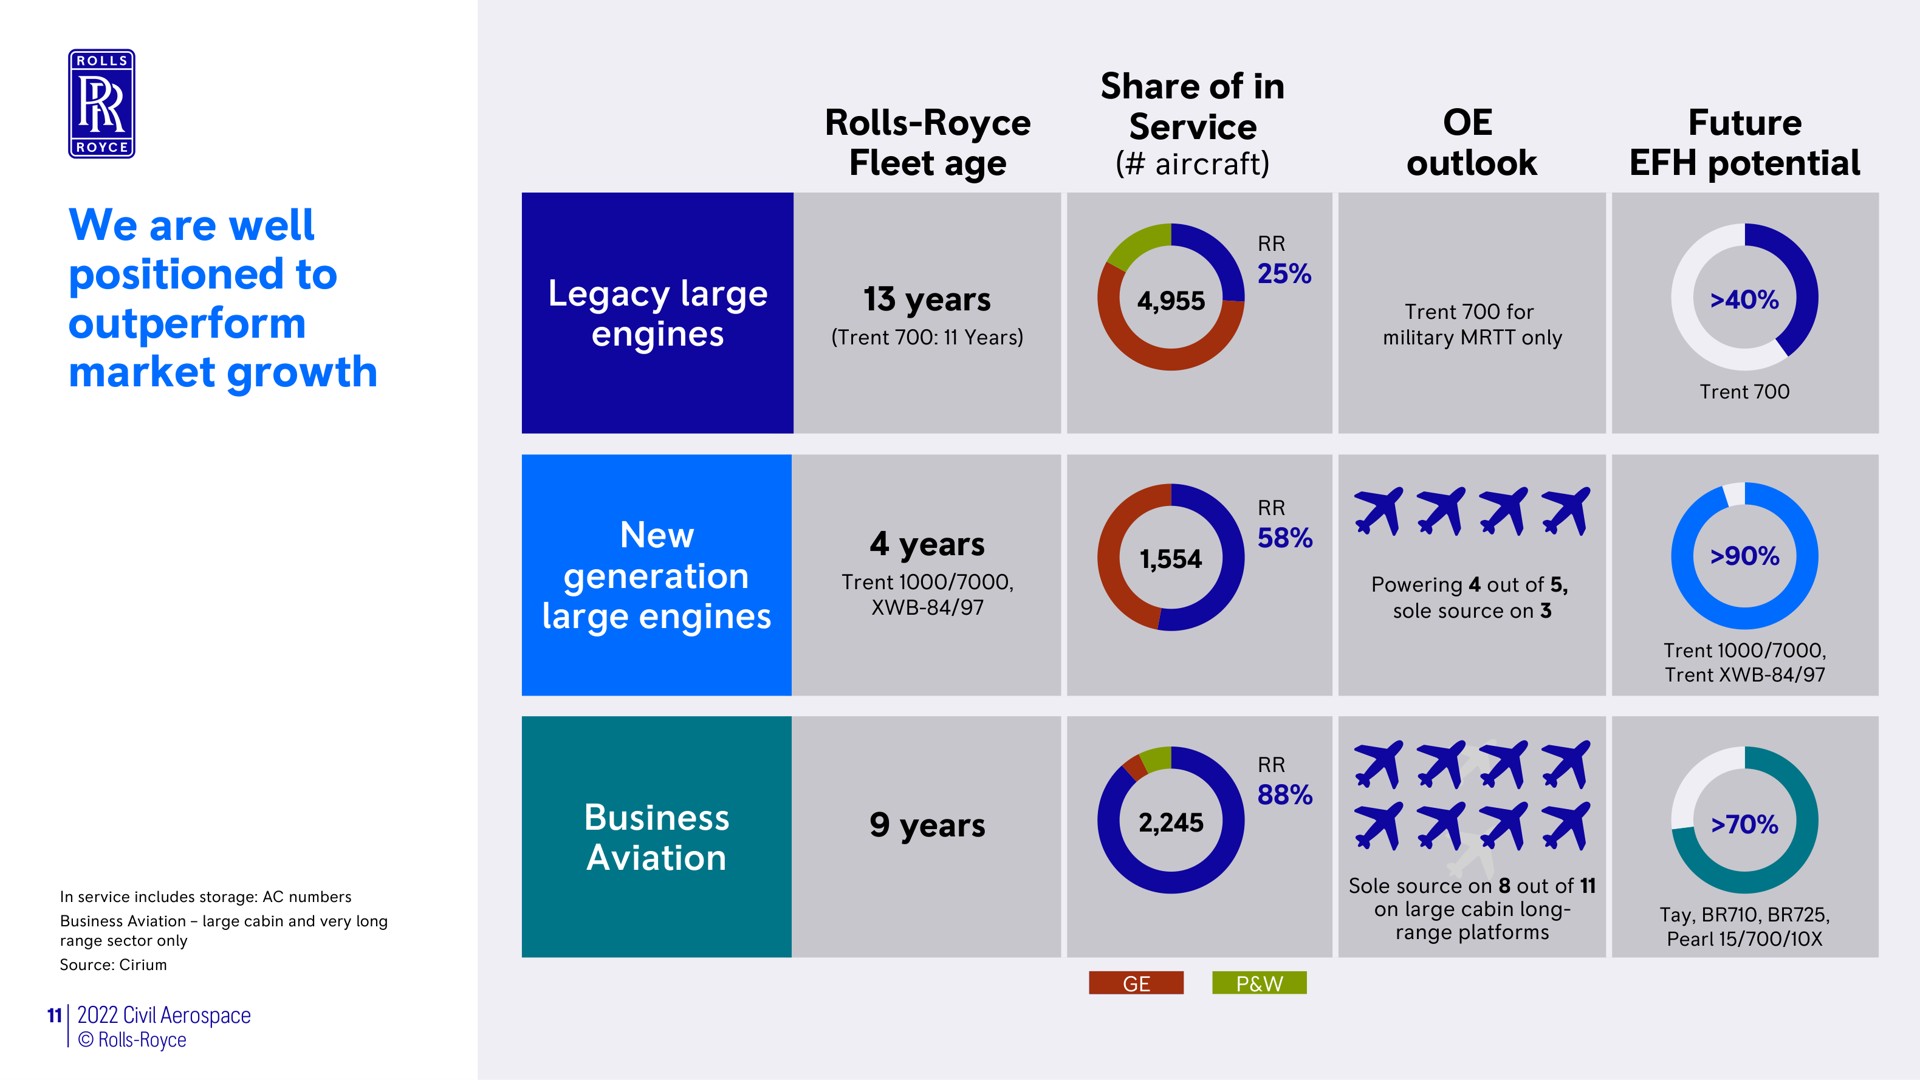 rolls fleet age share of in service outlook future potential we are well positioned to outperform market growth legacy large engines years new generation large engines years business aviation years | Rolls-Royce Holdings